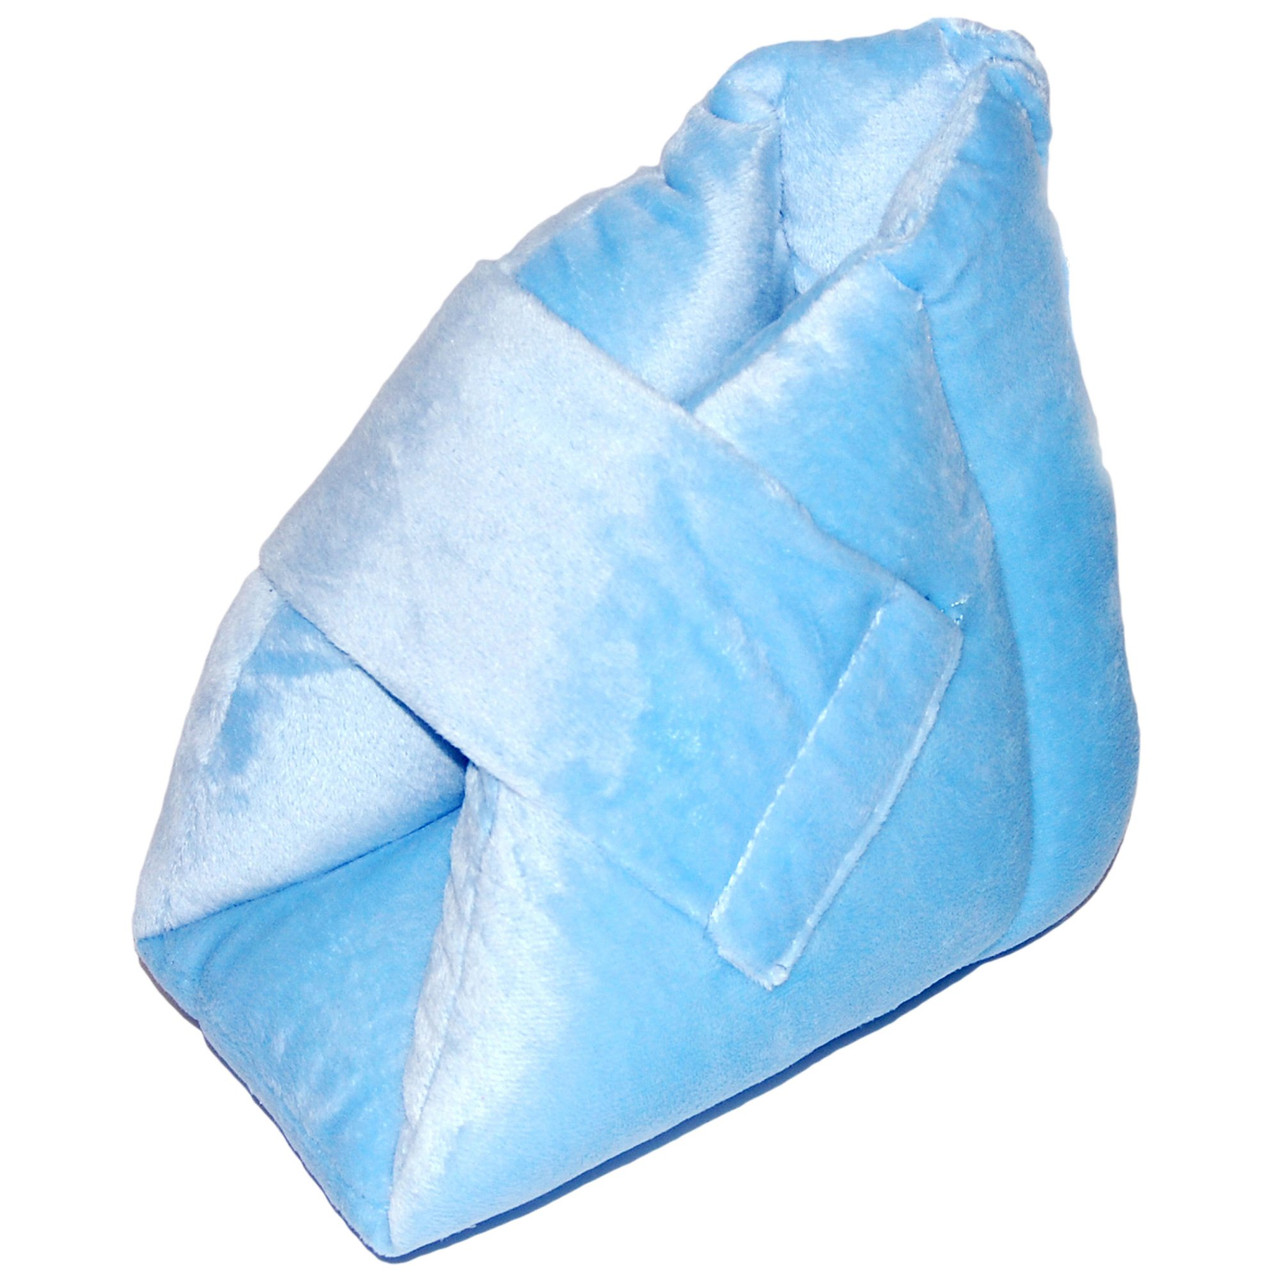 DMI Heel Cushion Protector Pillow to Relieve Pressure from Sores